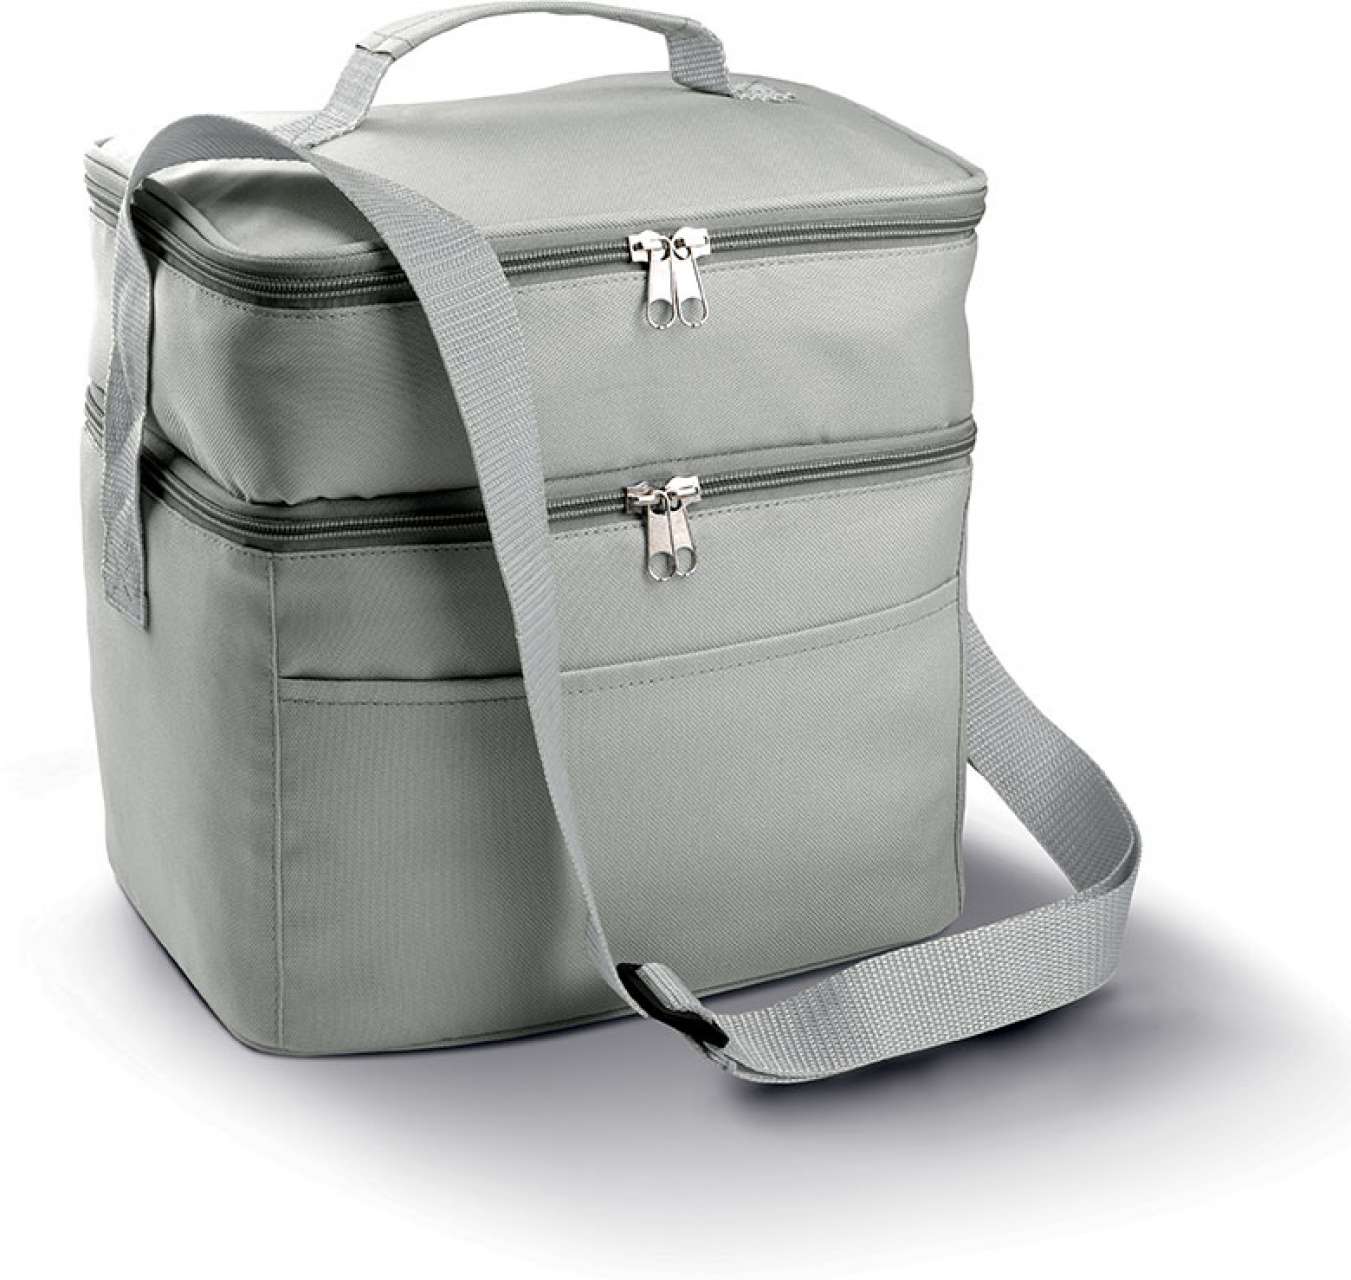 Promo  DOUBLE COMPARTMENT COOLER BAG